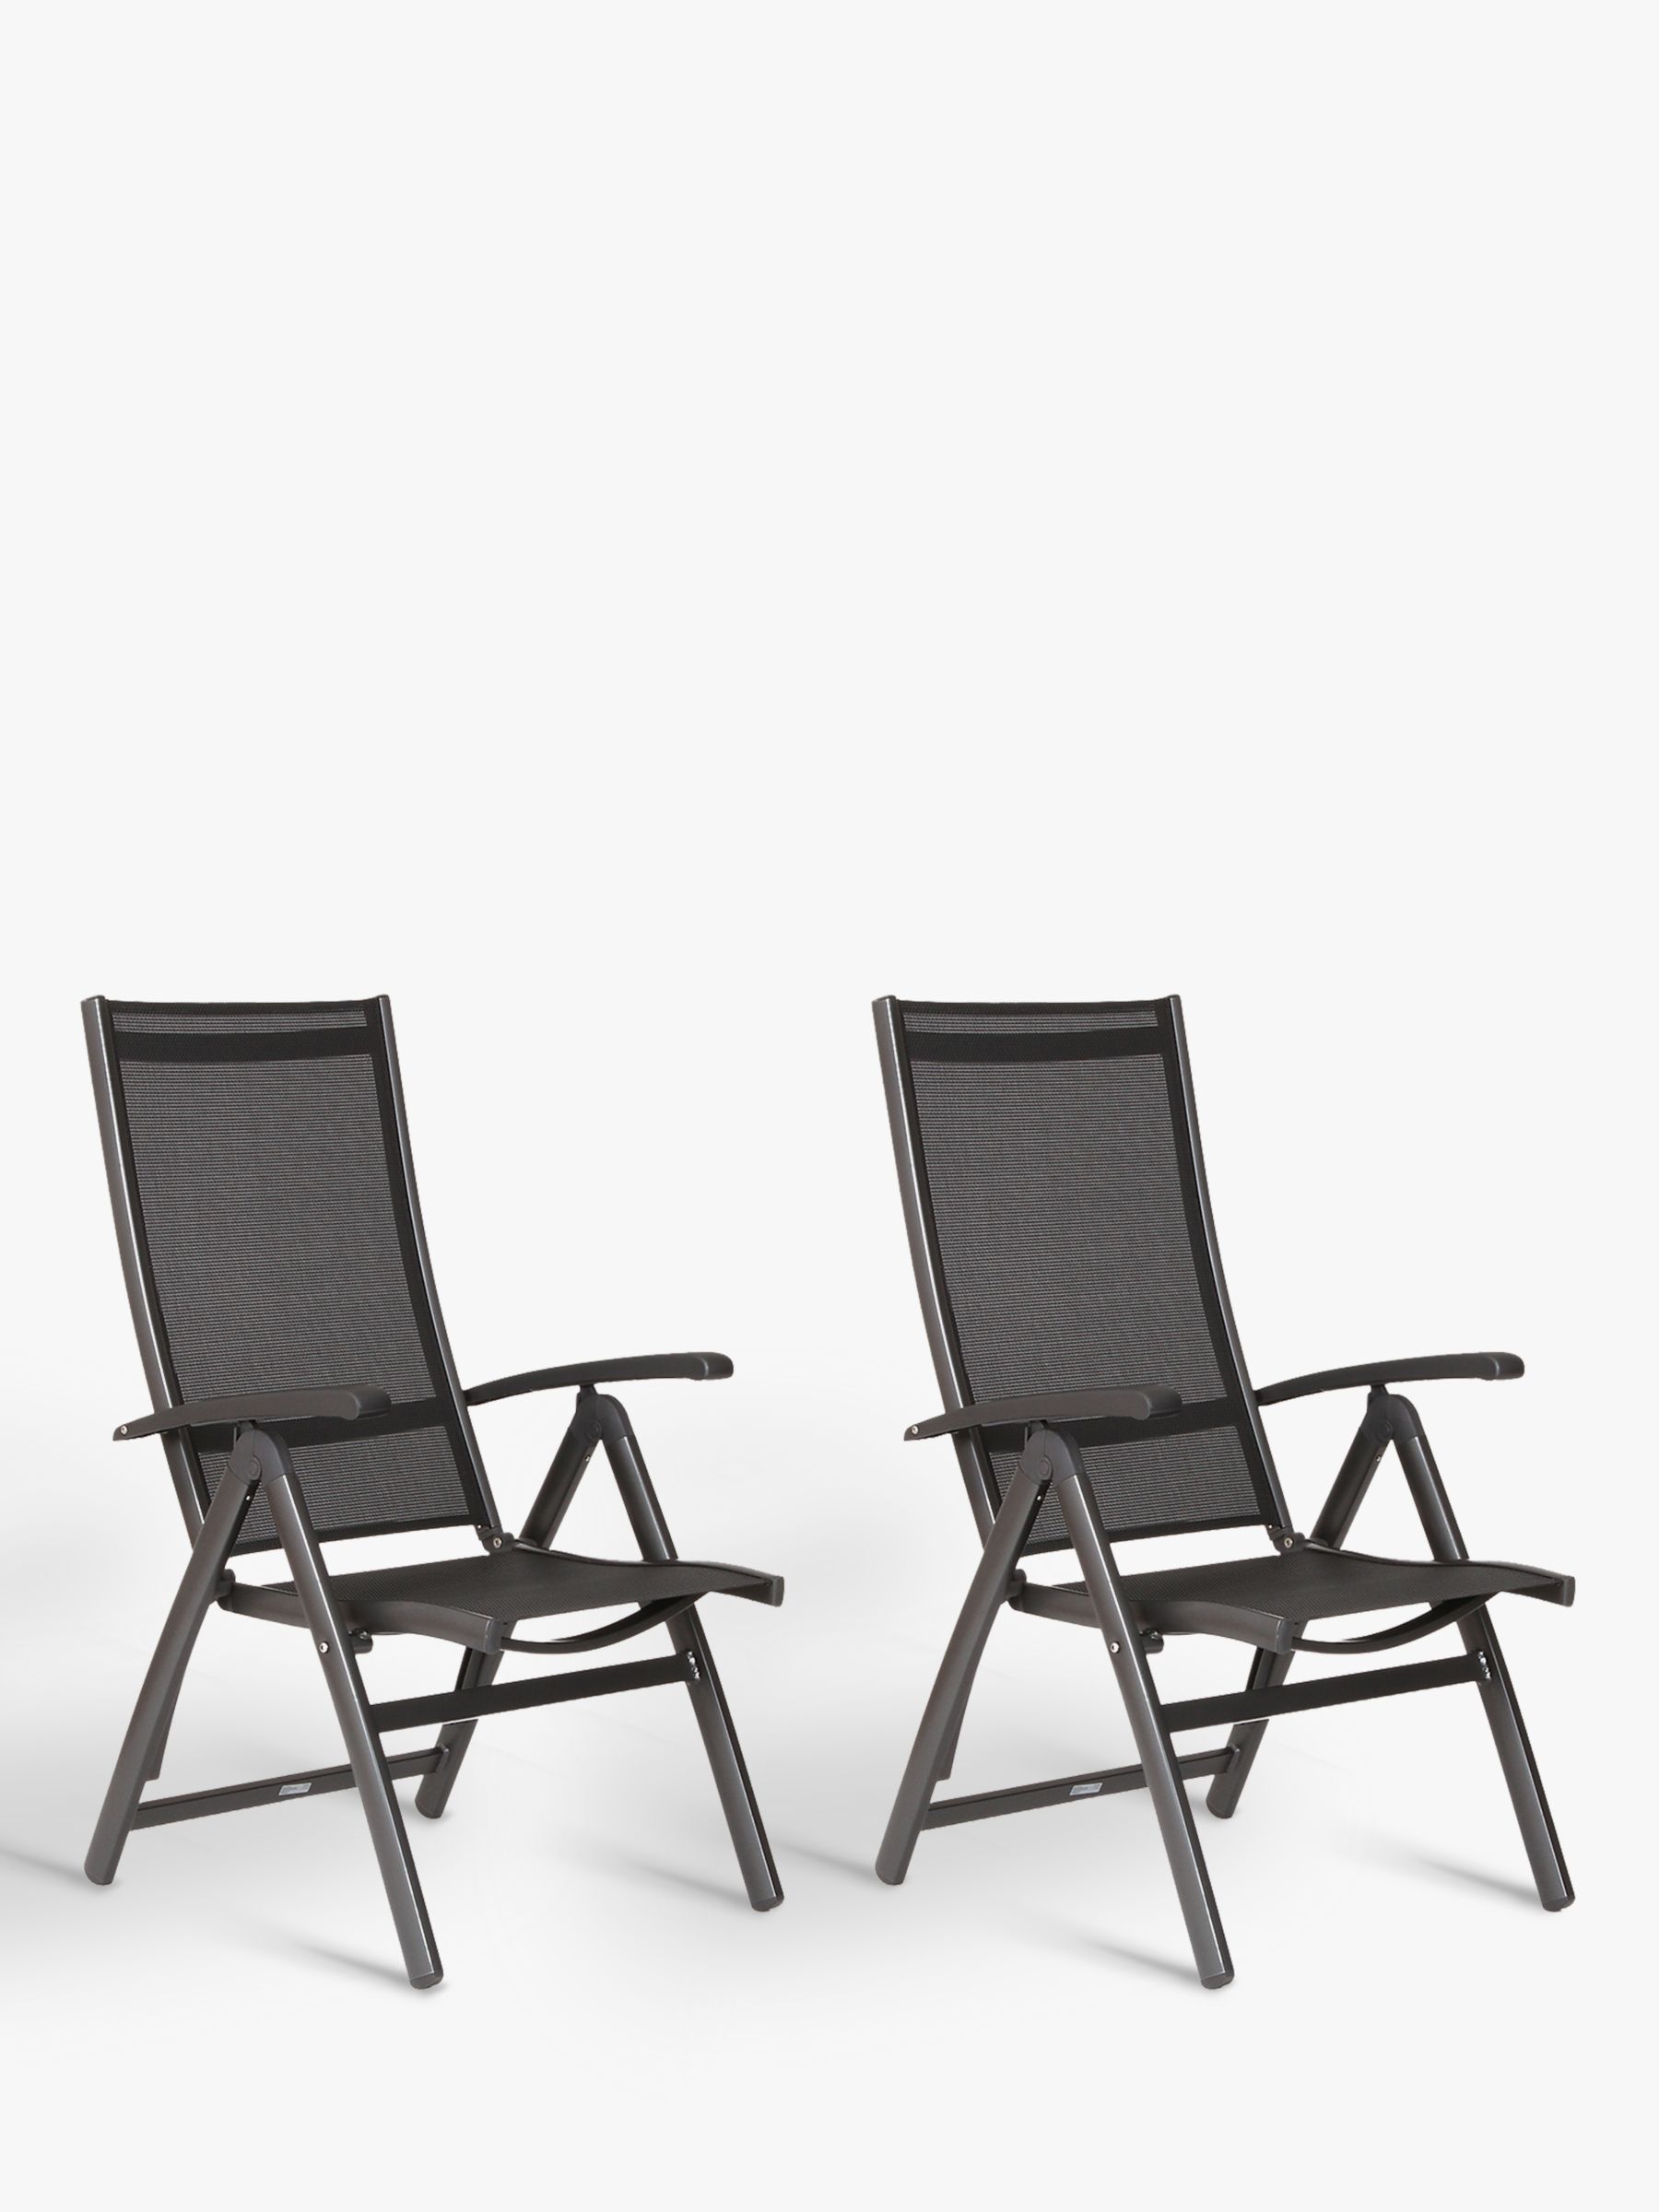 Photo of Kettler surf multi position reclining sun loungers set of 2 grey